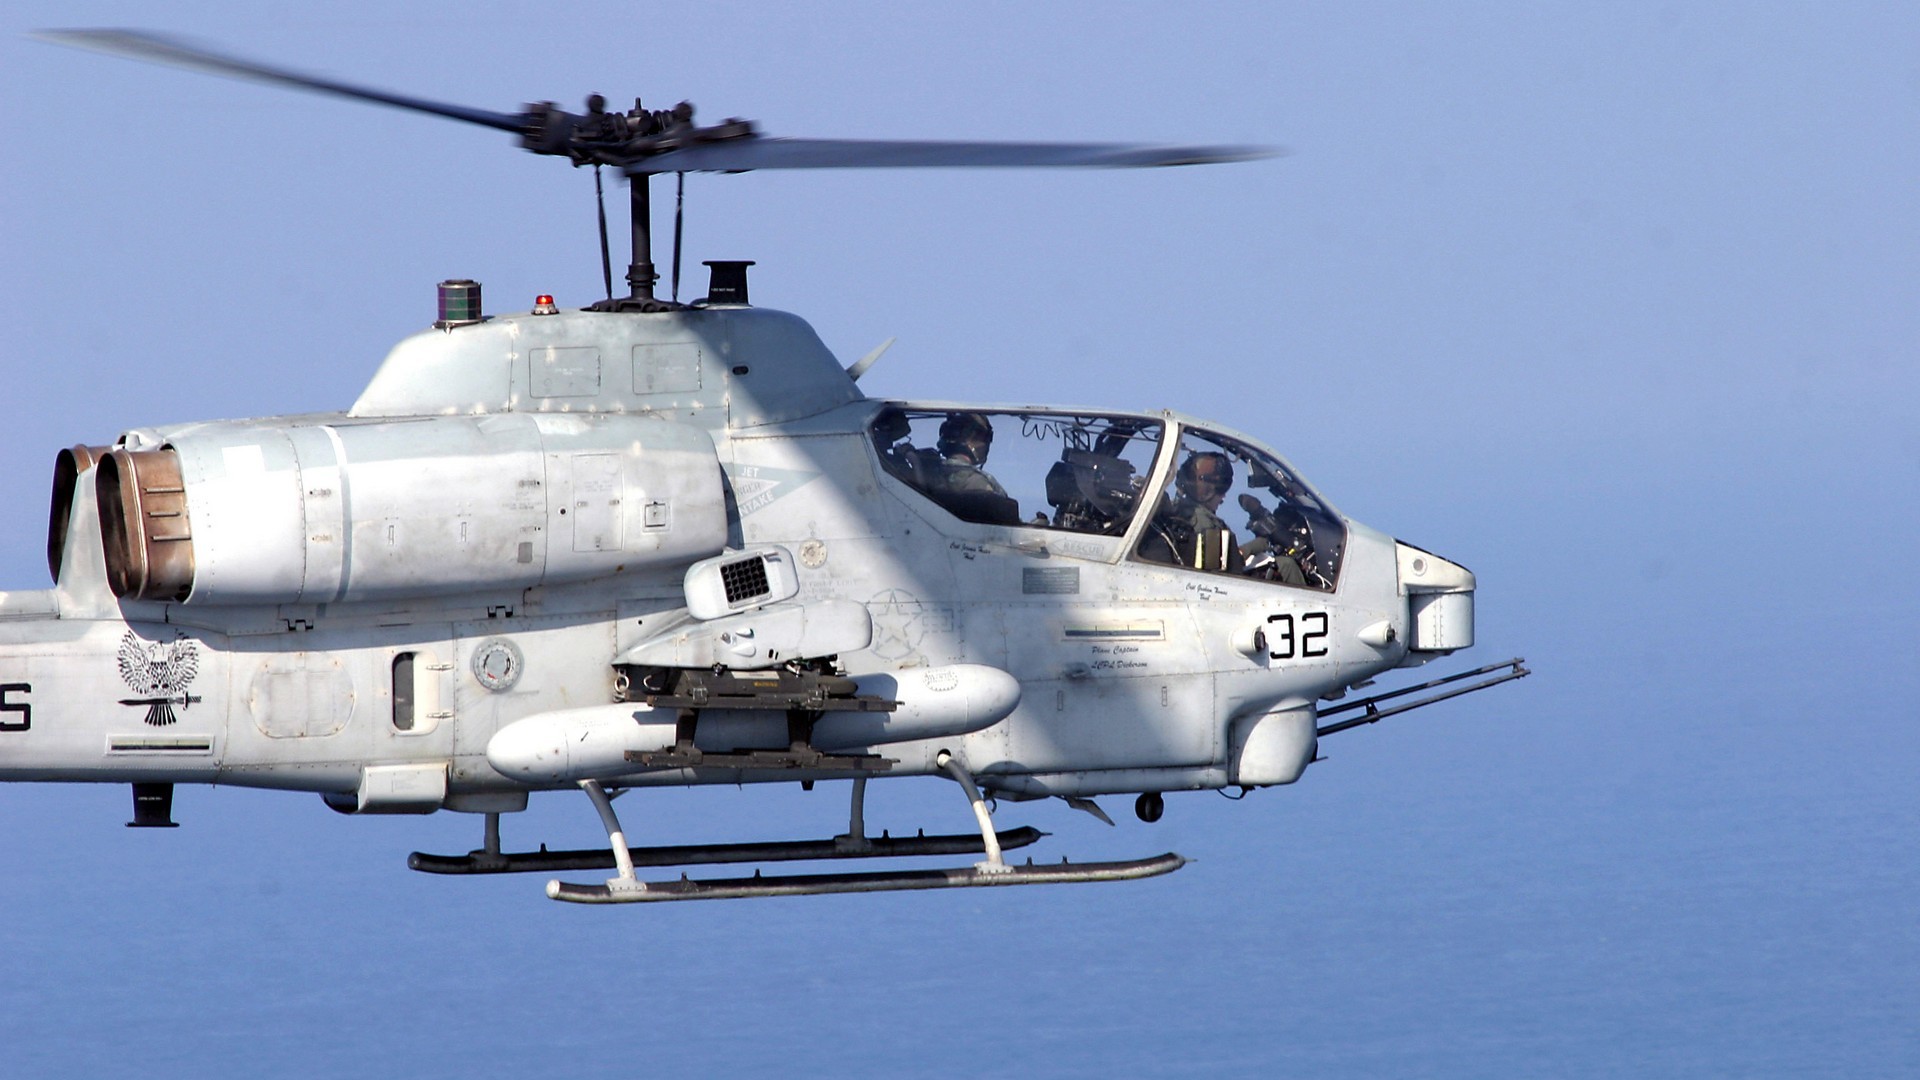 US_Navy_050405-M-1195M-013_An_AH-1W_Super_Cobra_assigned_to_Golden_Eagles_of_HMM-162,_provides_security_for_the_USS_Kearsarge_(LHD_3)_Expeditionary_Strike_Group_cr.jpg